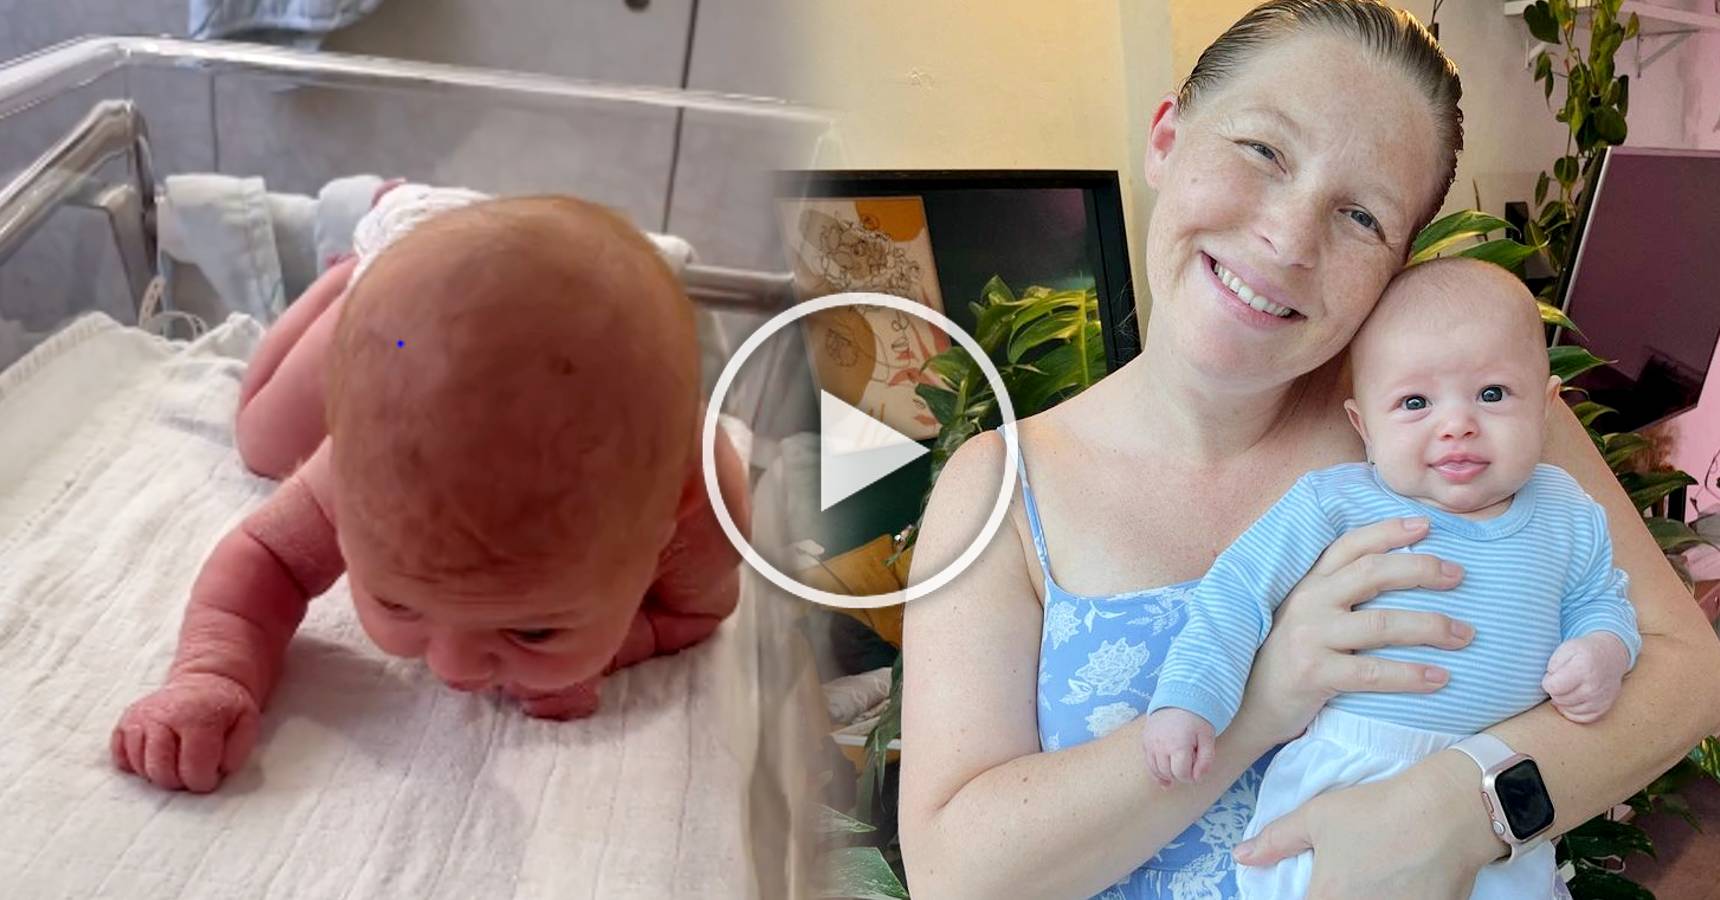 This new born baby start to crawl and tries to talk at just 3 days after her birth